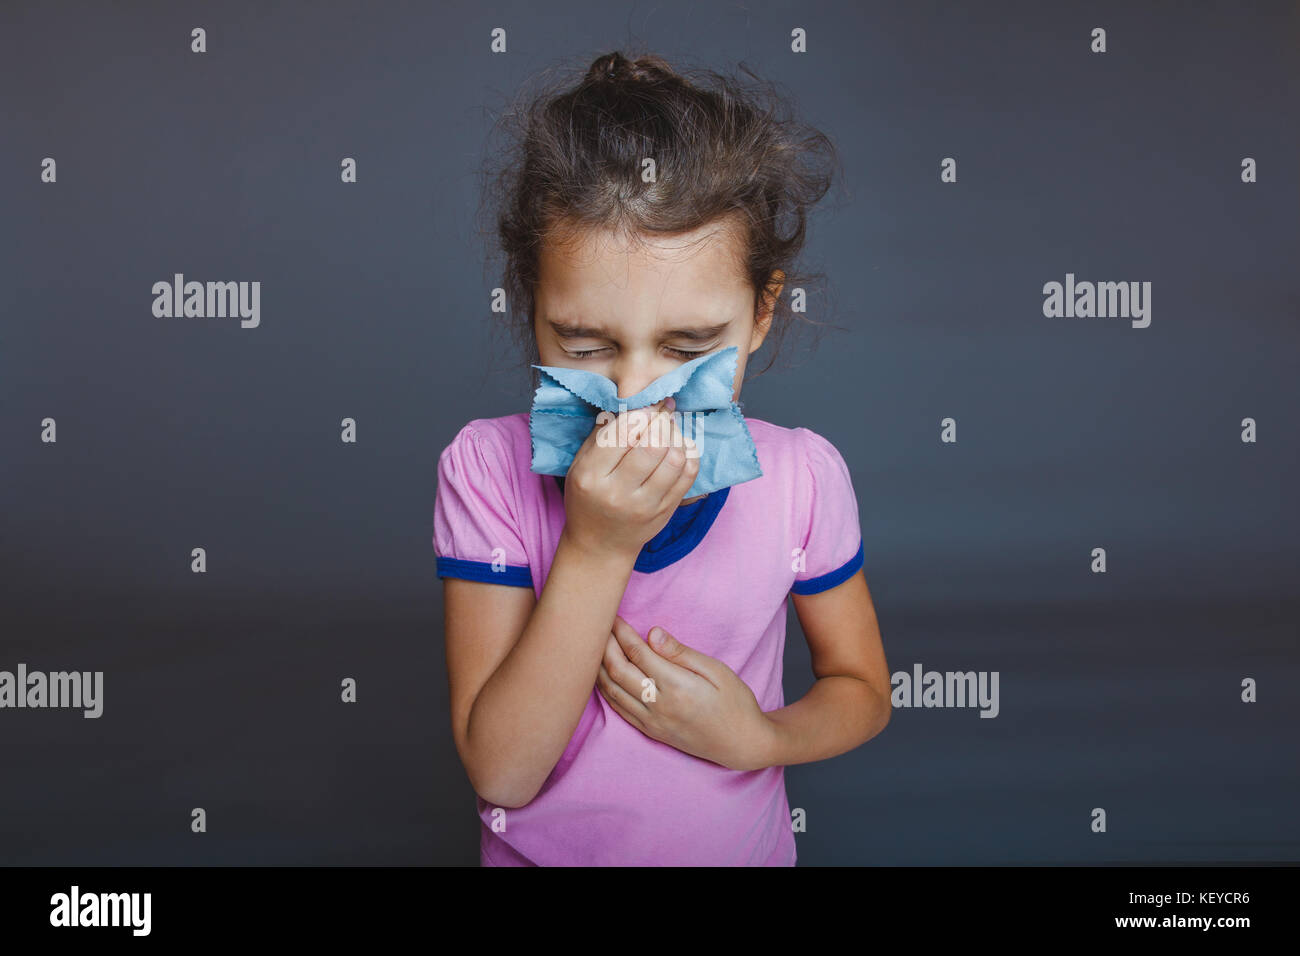 girl blowing his nose into a handkerchief on a gray background Stock Photo